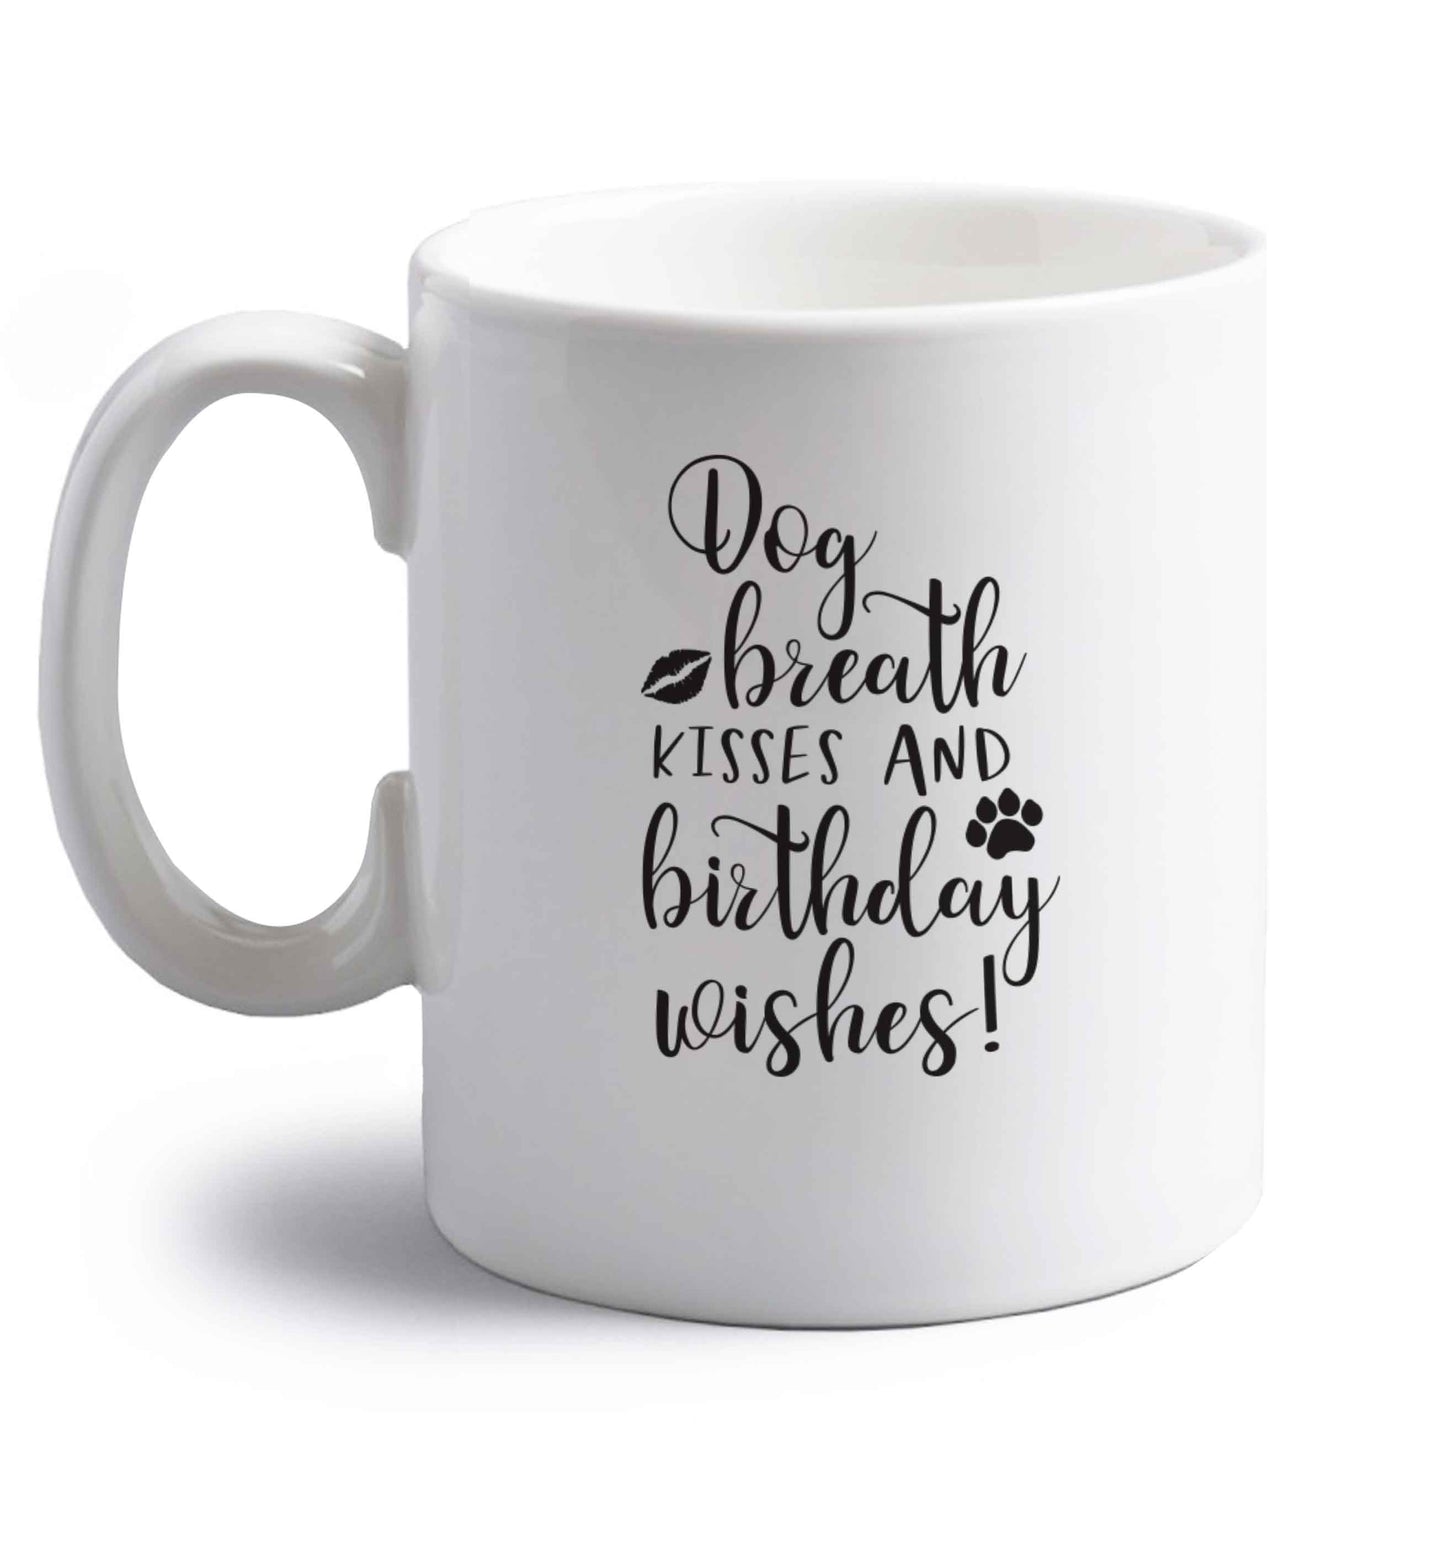 Dog breath kisses and christmas wishes right handed white ceramic mug 